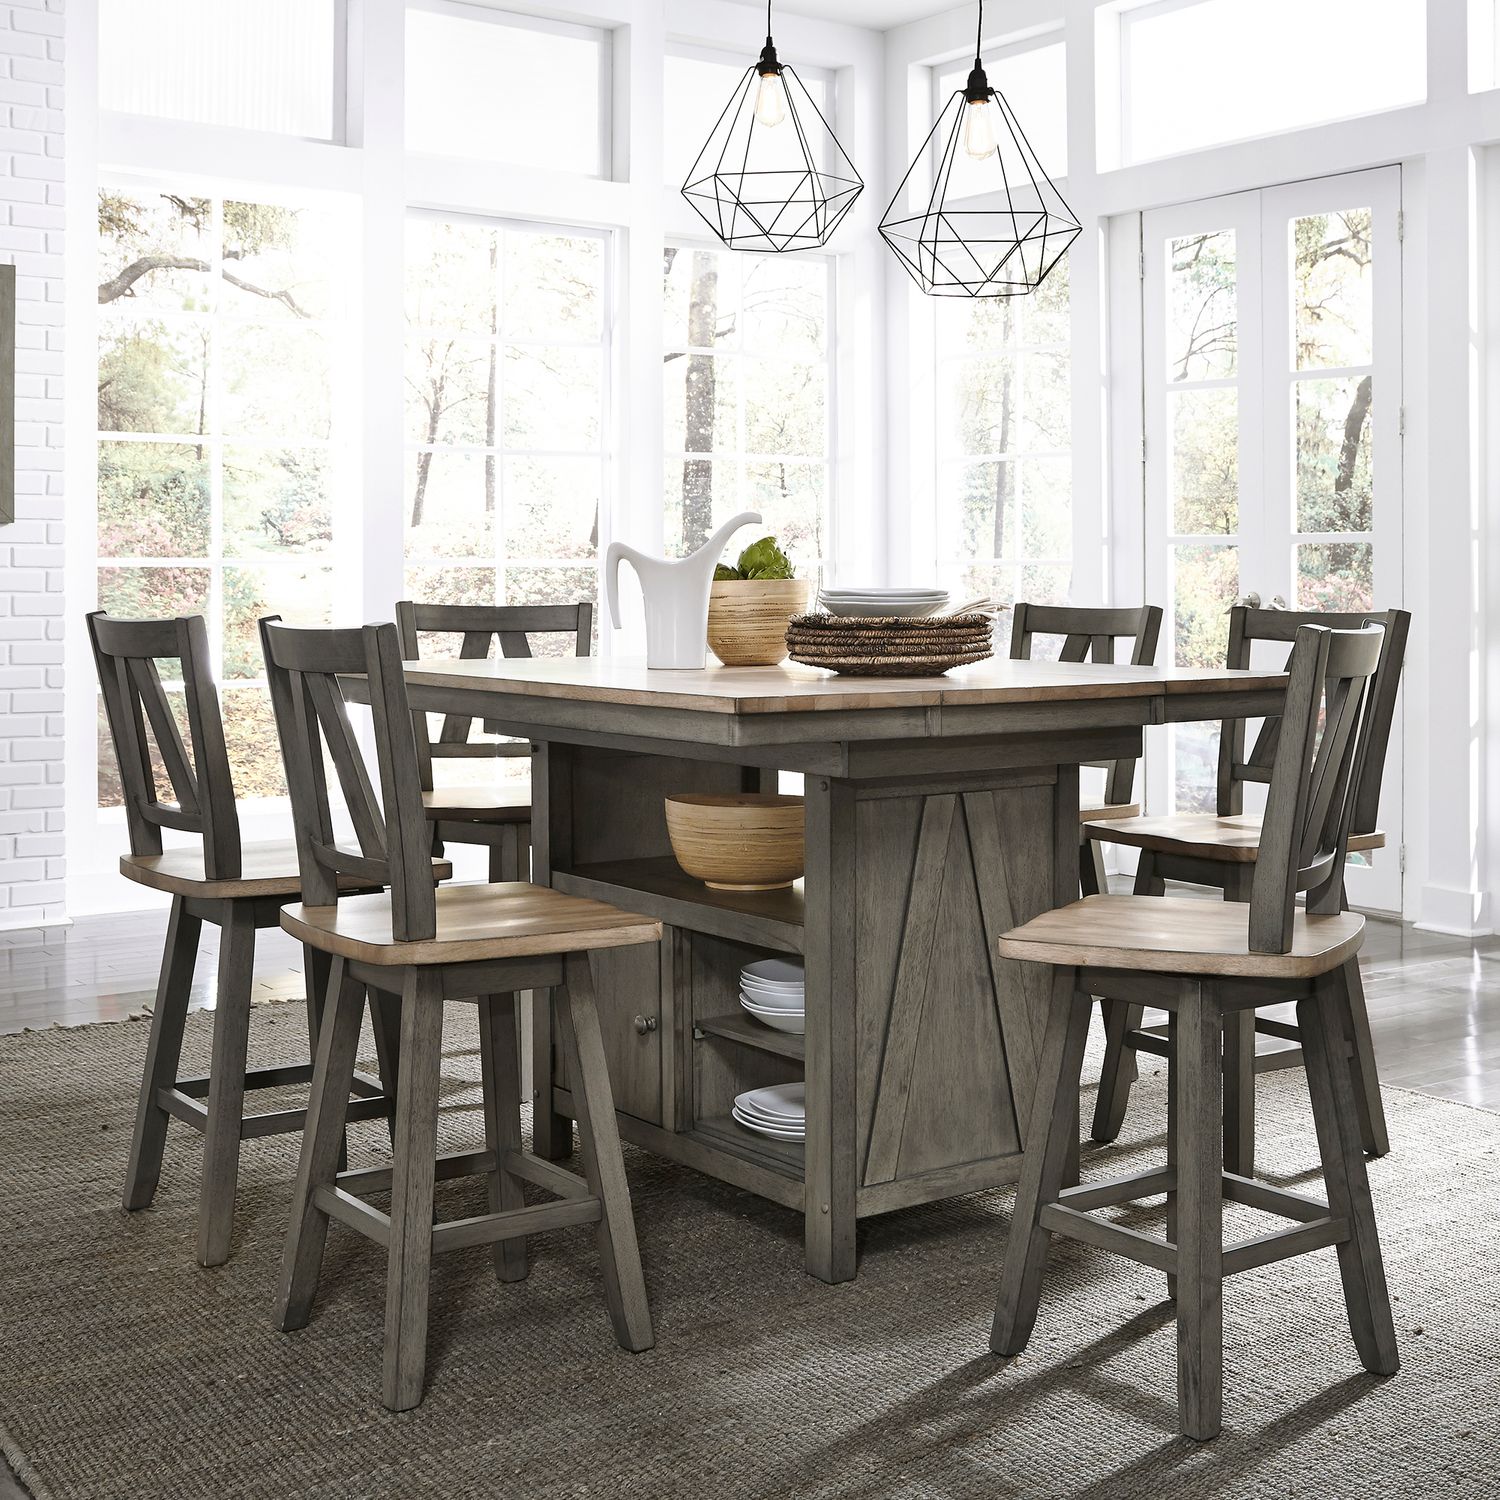 Lindsey Farm 7 Piece Gathering Table Set from Liberty Furniture